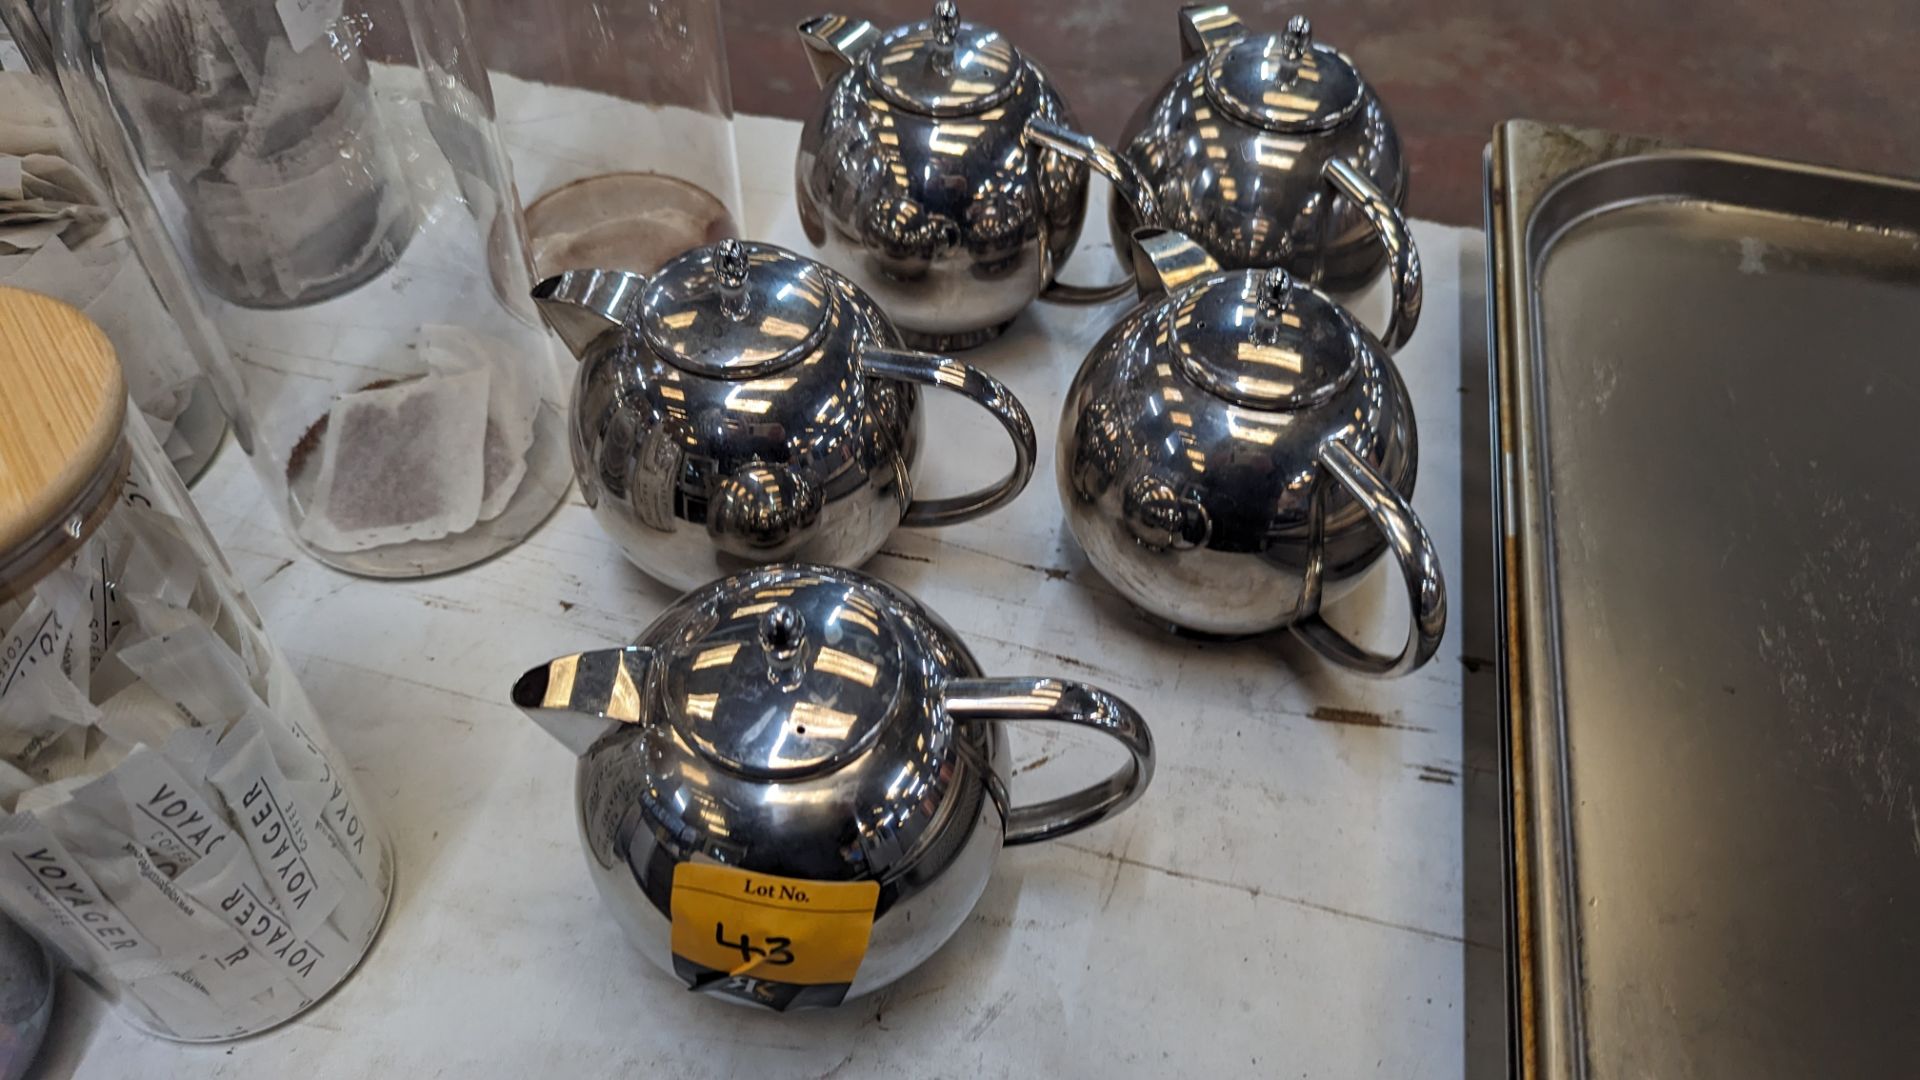 5 off small stainless steel teapots - Image 2 of 6